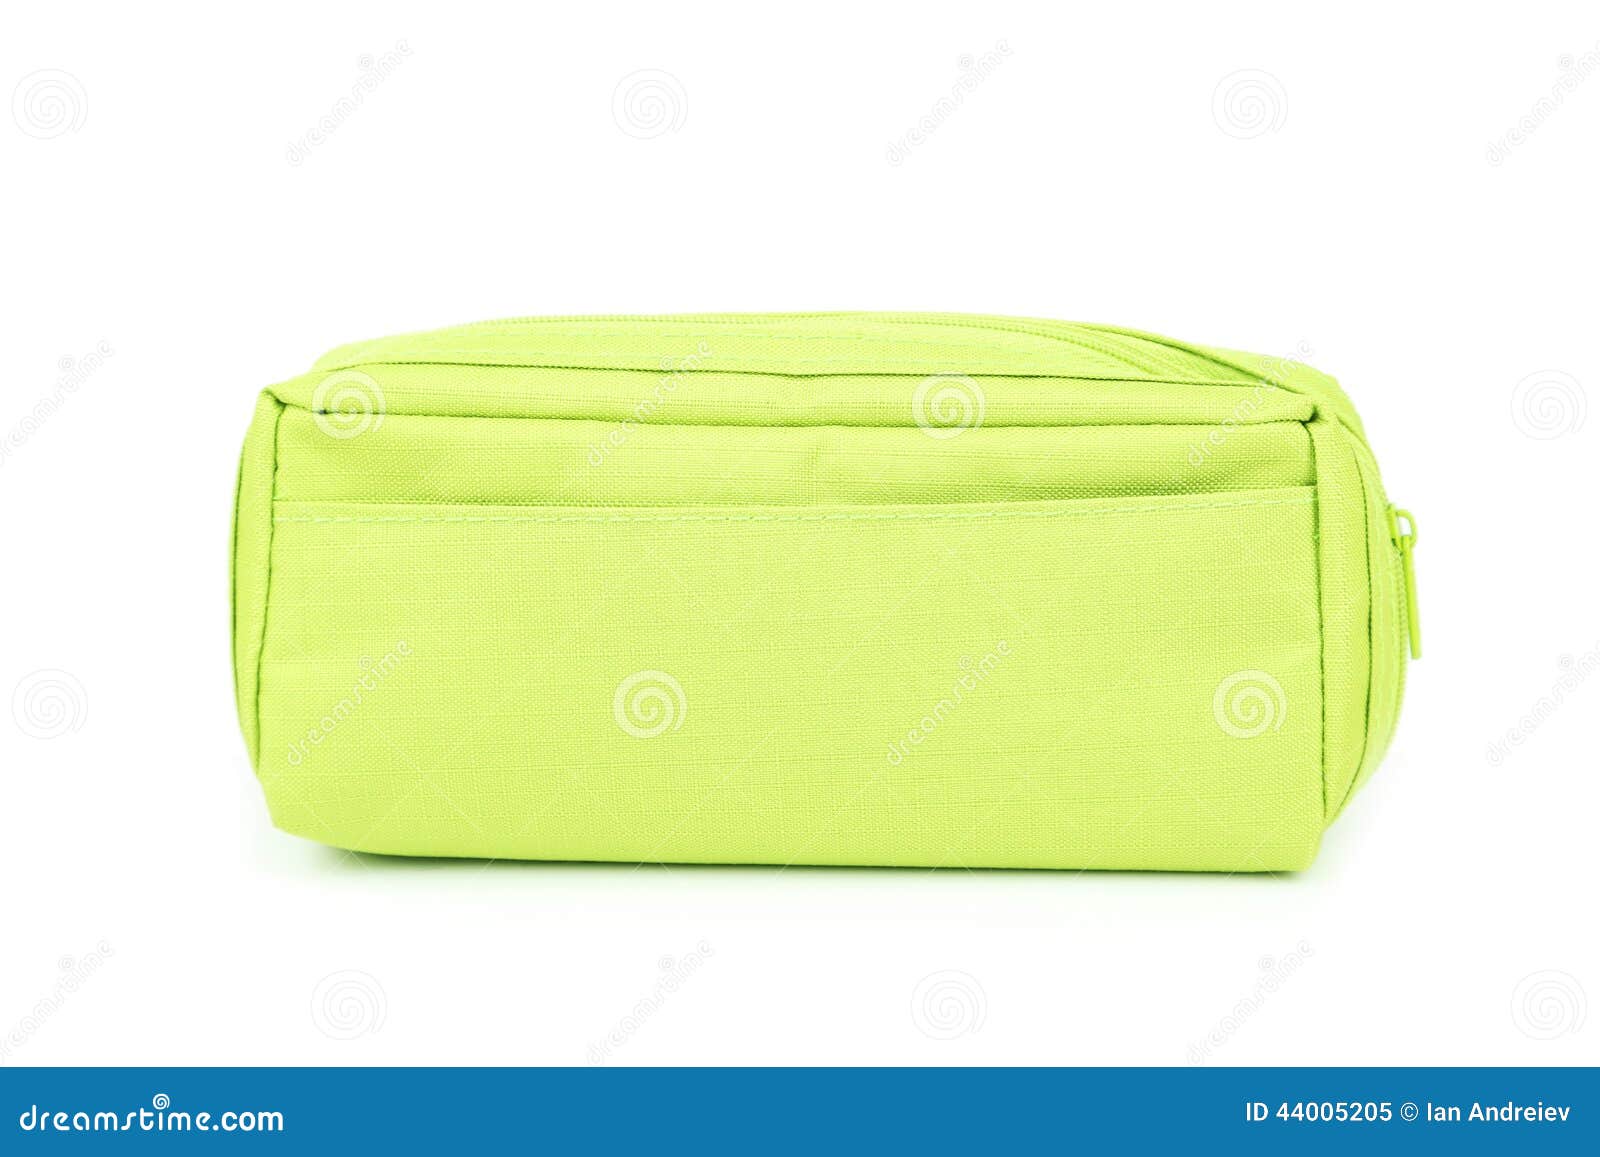 A Pencil Case Isolated on White Background Stock Image - Image of draw ...